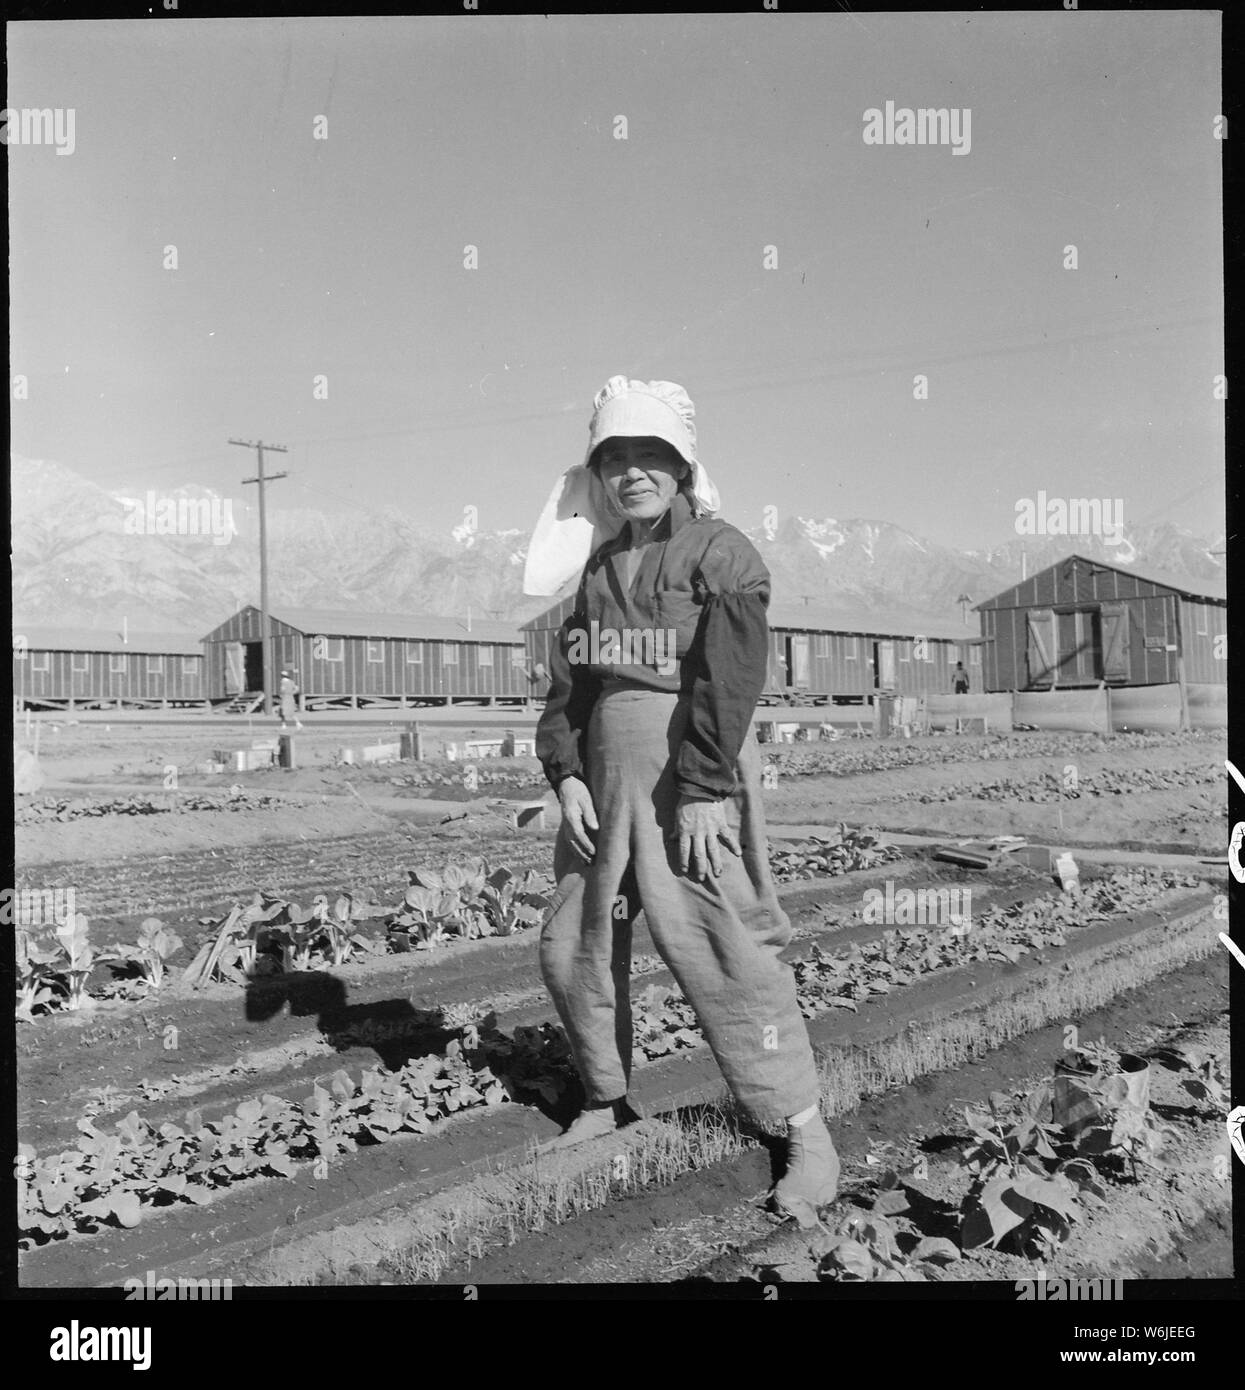 Manzanar Relocation Center, Manzanar, California. Evacuee in her hobby garden which rates highest . . .; Scope and content:  The full caption for this photograph reads: Manzanar Relocation Center, Manzanar, California. Evacuee in her hobby garden which rates highest of all the garden plots at this War Relocation Authority center. Vegetables for their own use are grown in plots 10 x 50 feet between barrack rows. Stock Photo